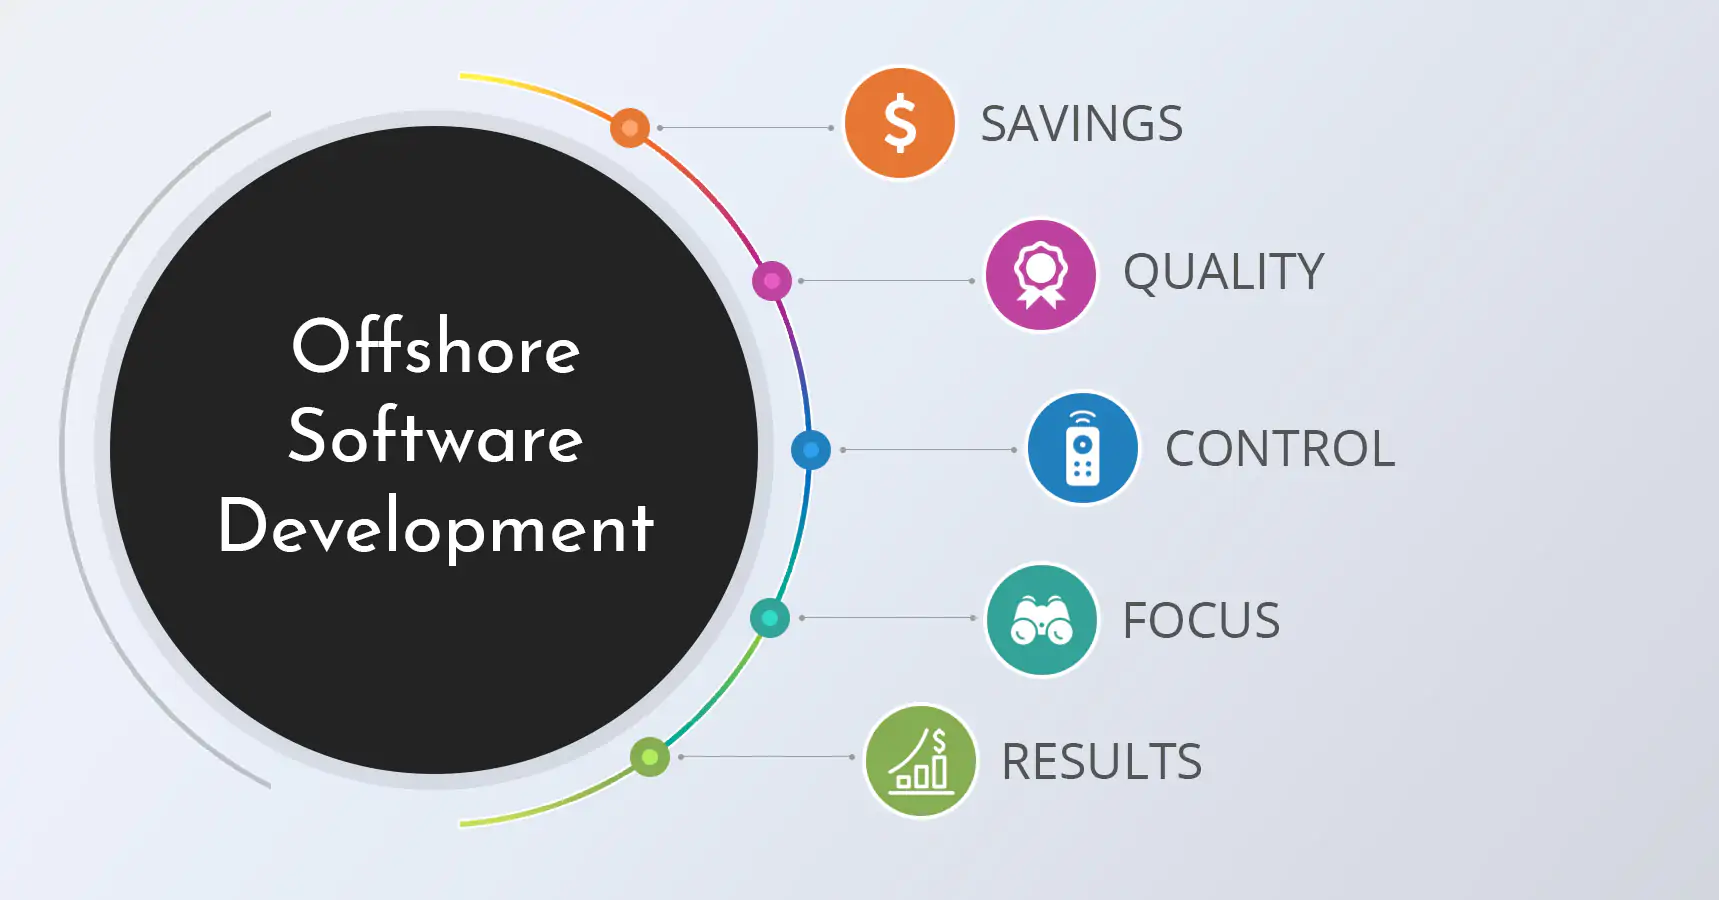 Myths About Offshore Software Development